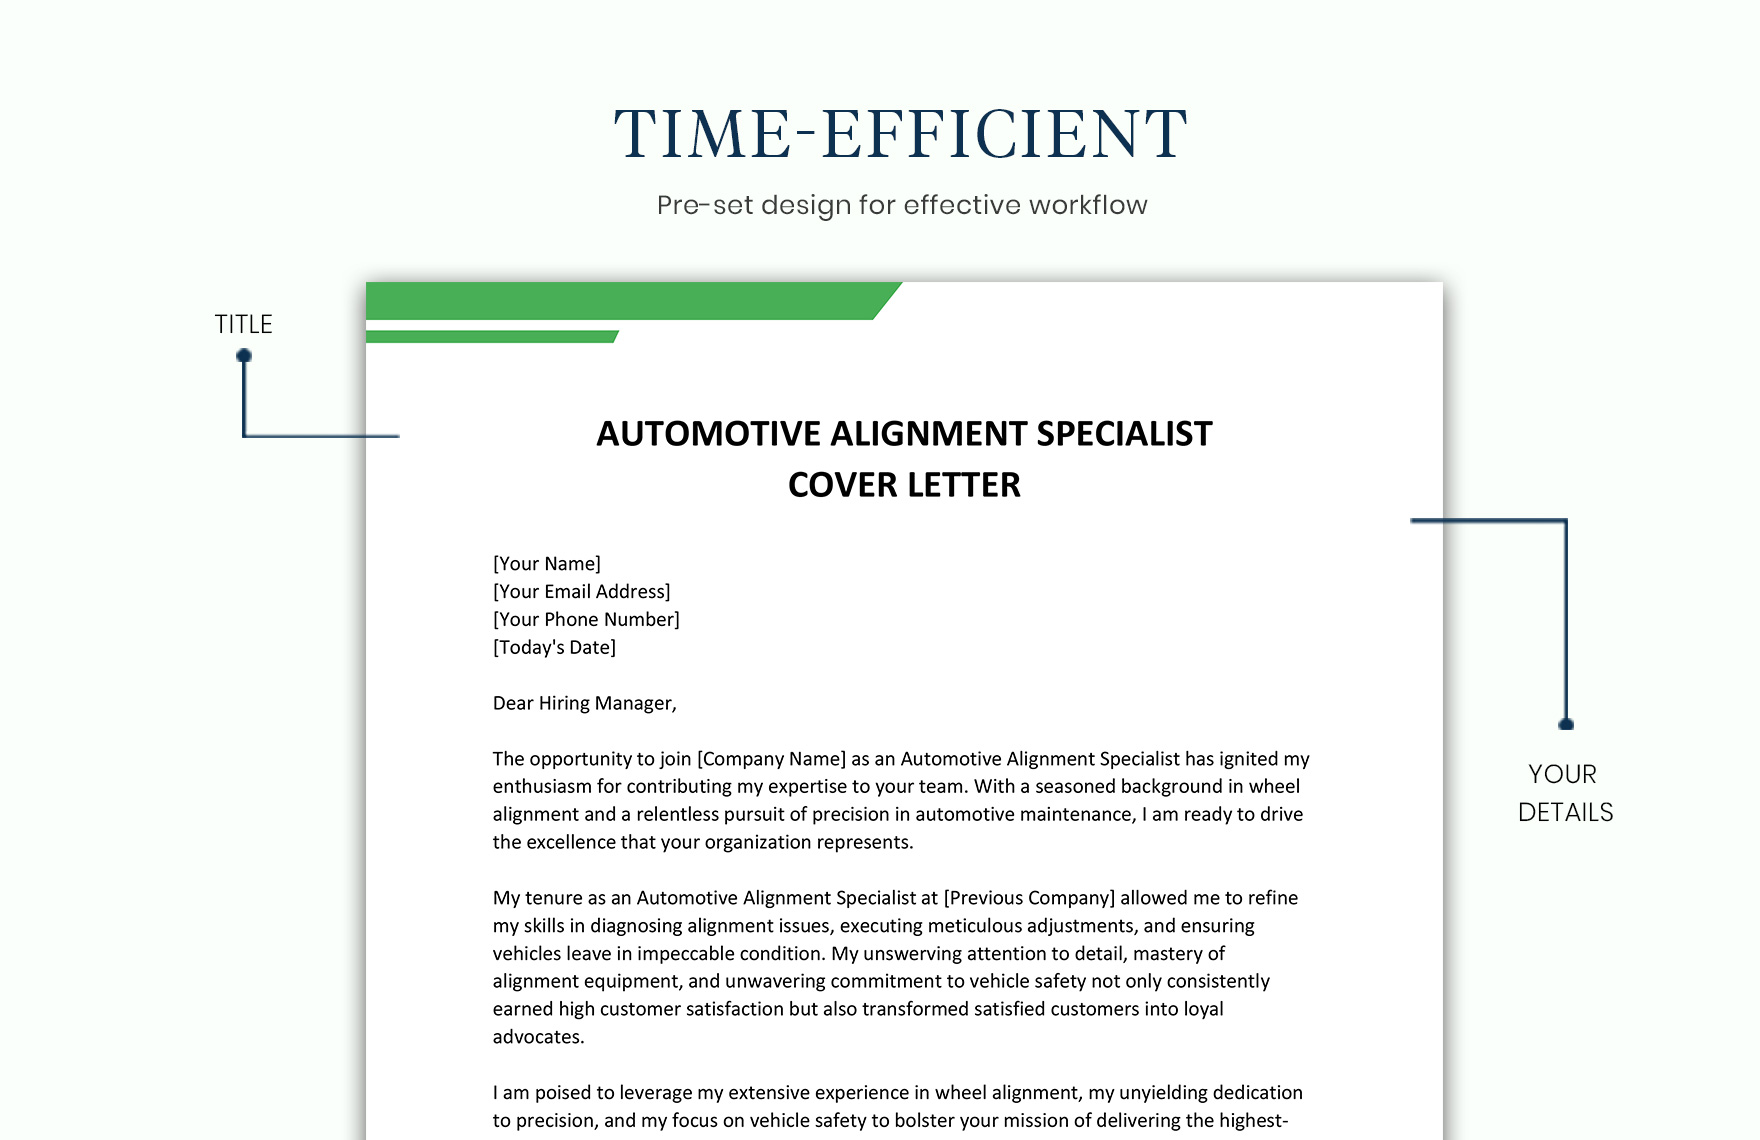 Automotive Alignment Specialist Cover Letter